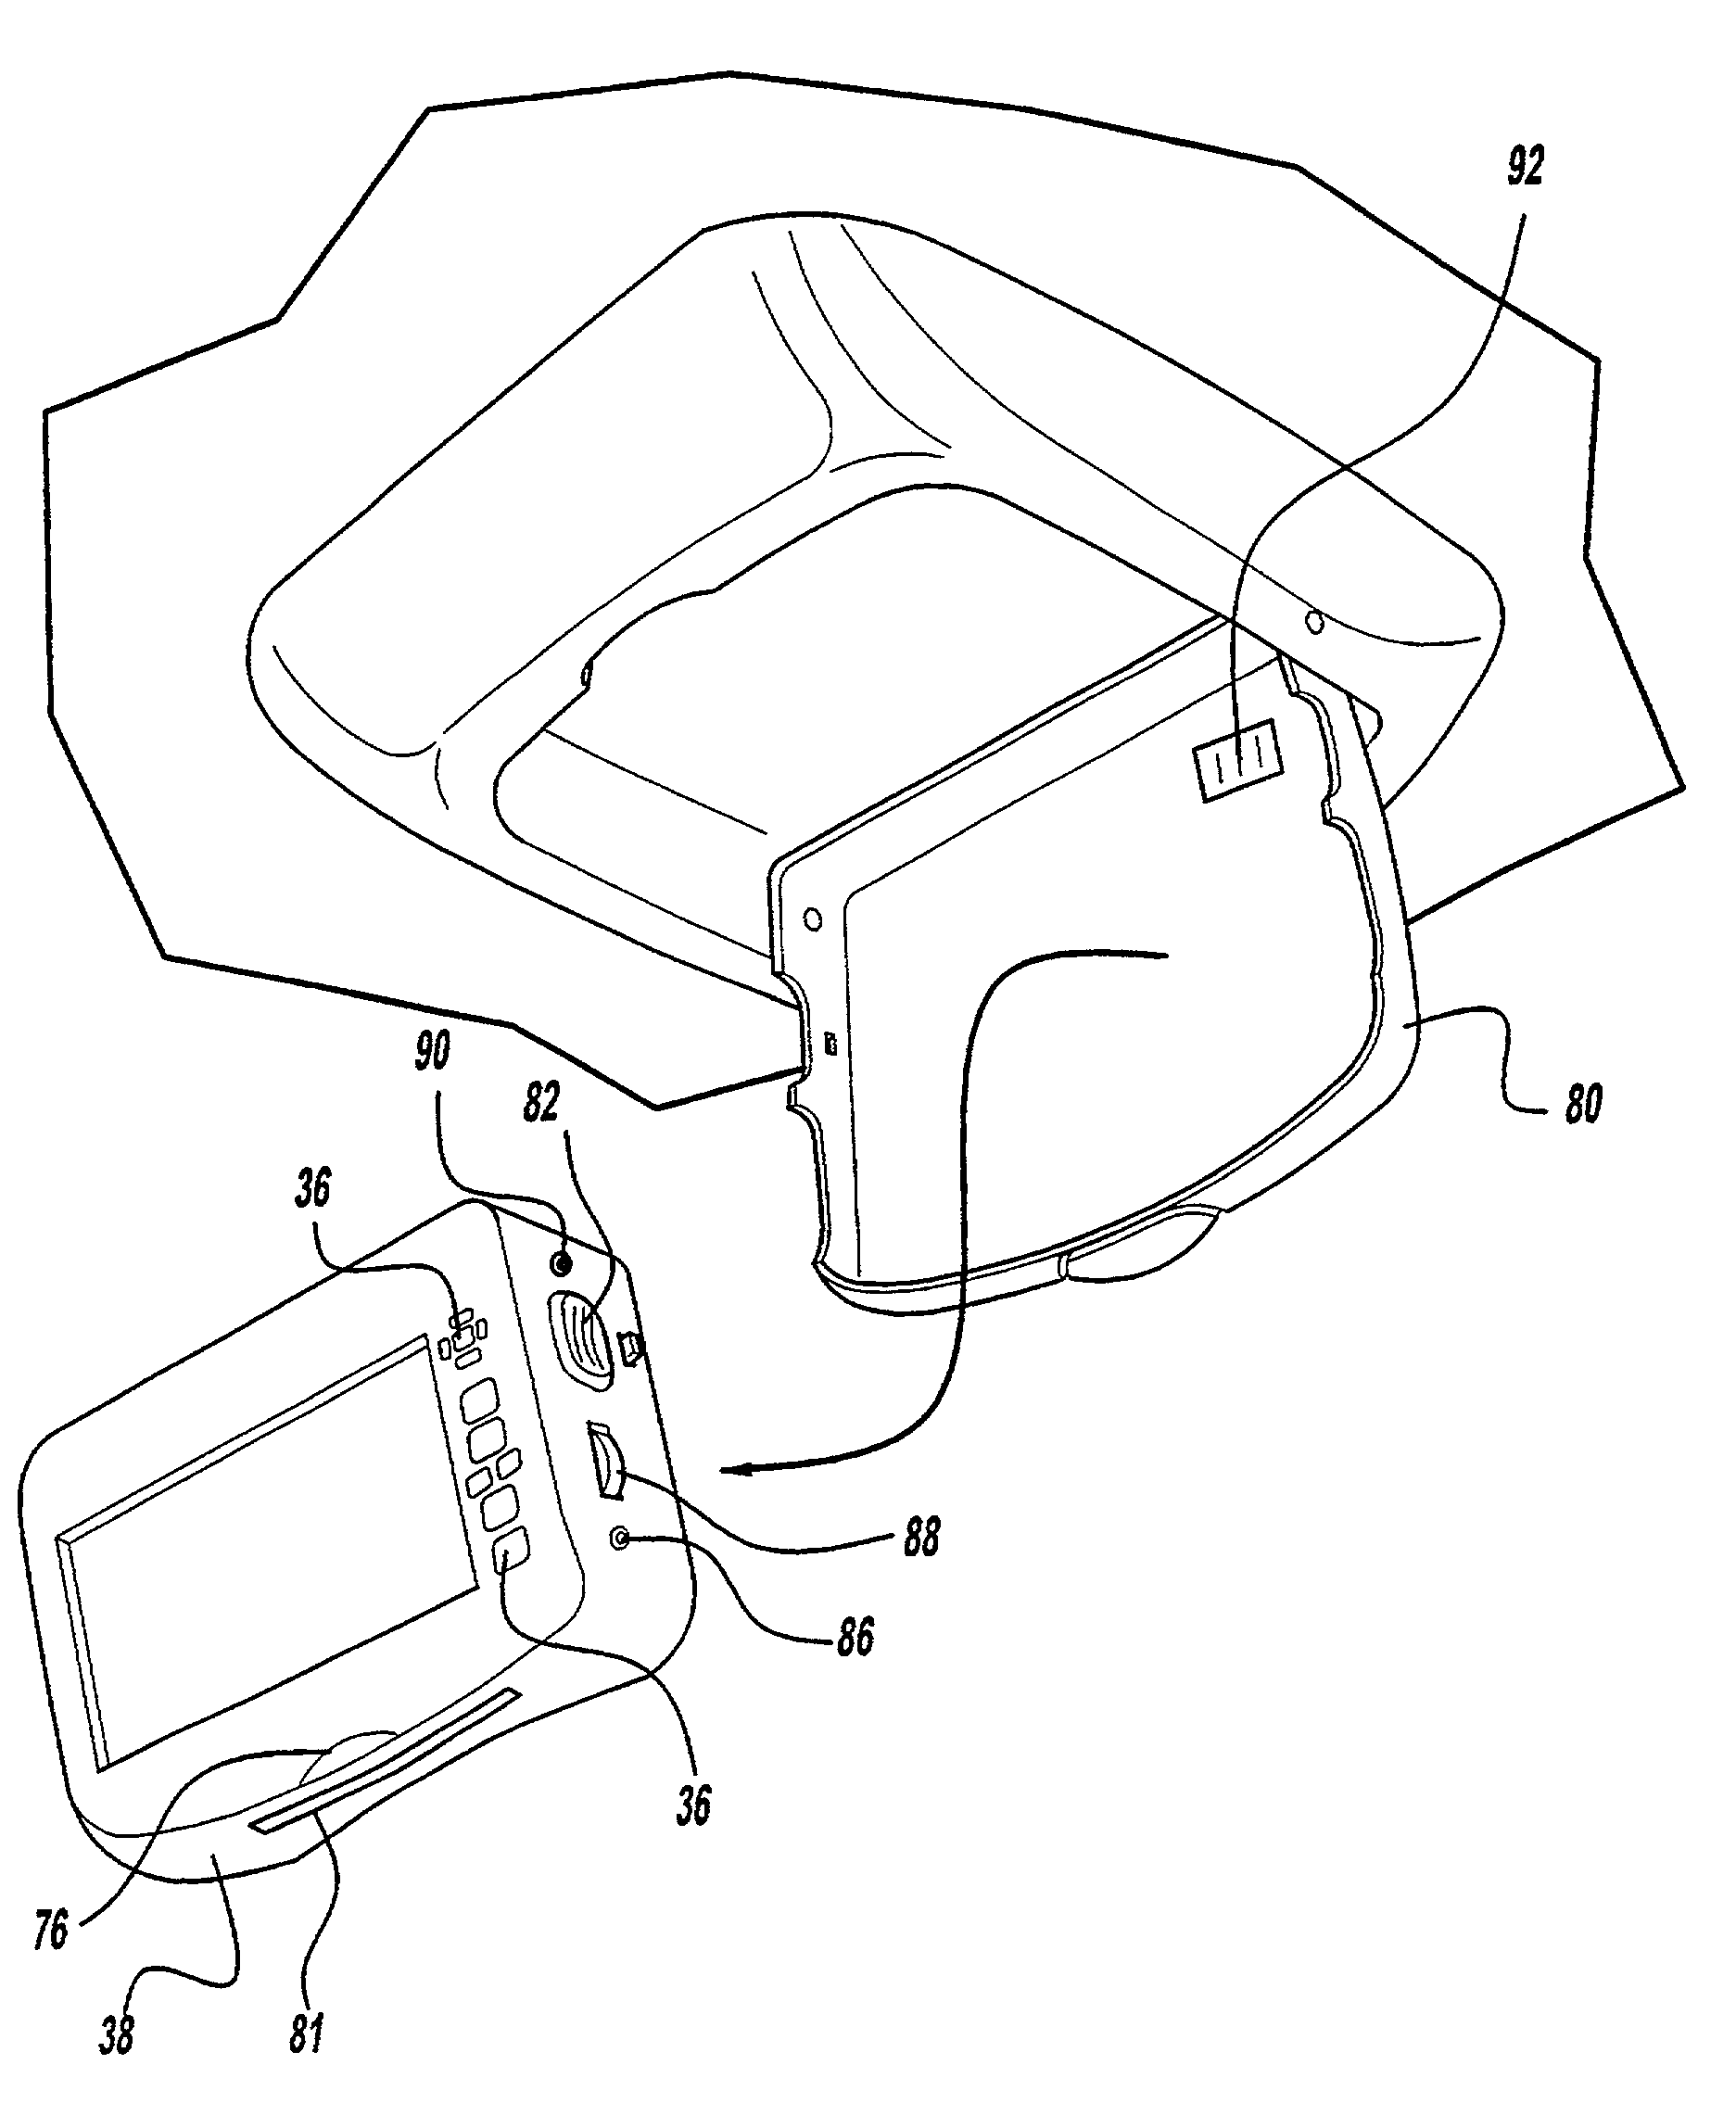 Video display system for a vehicle